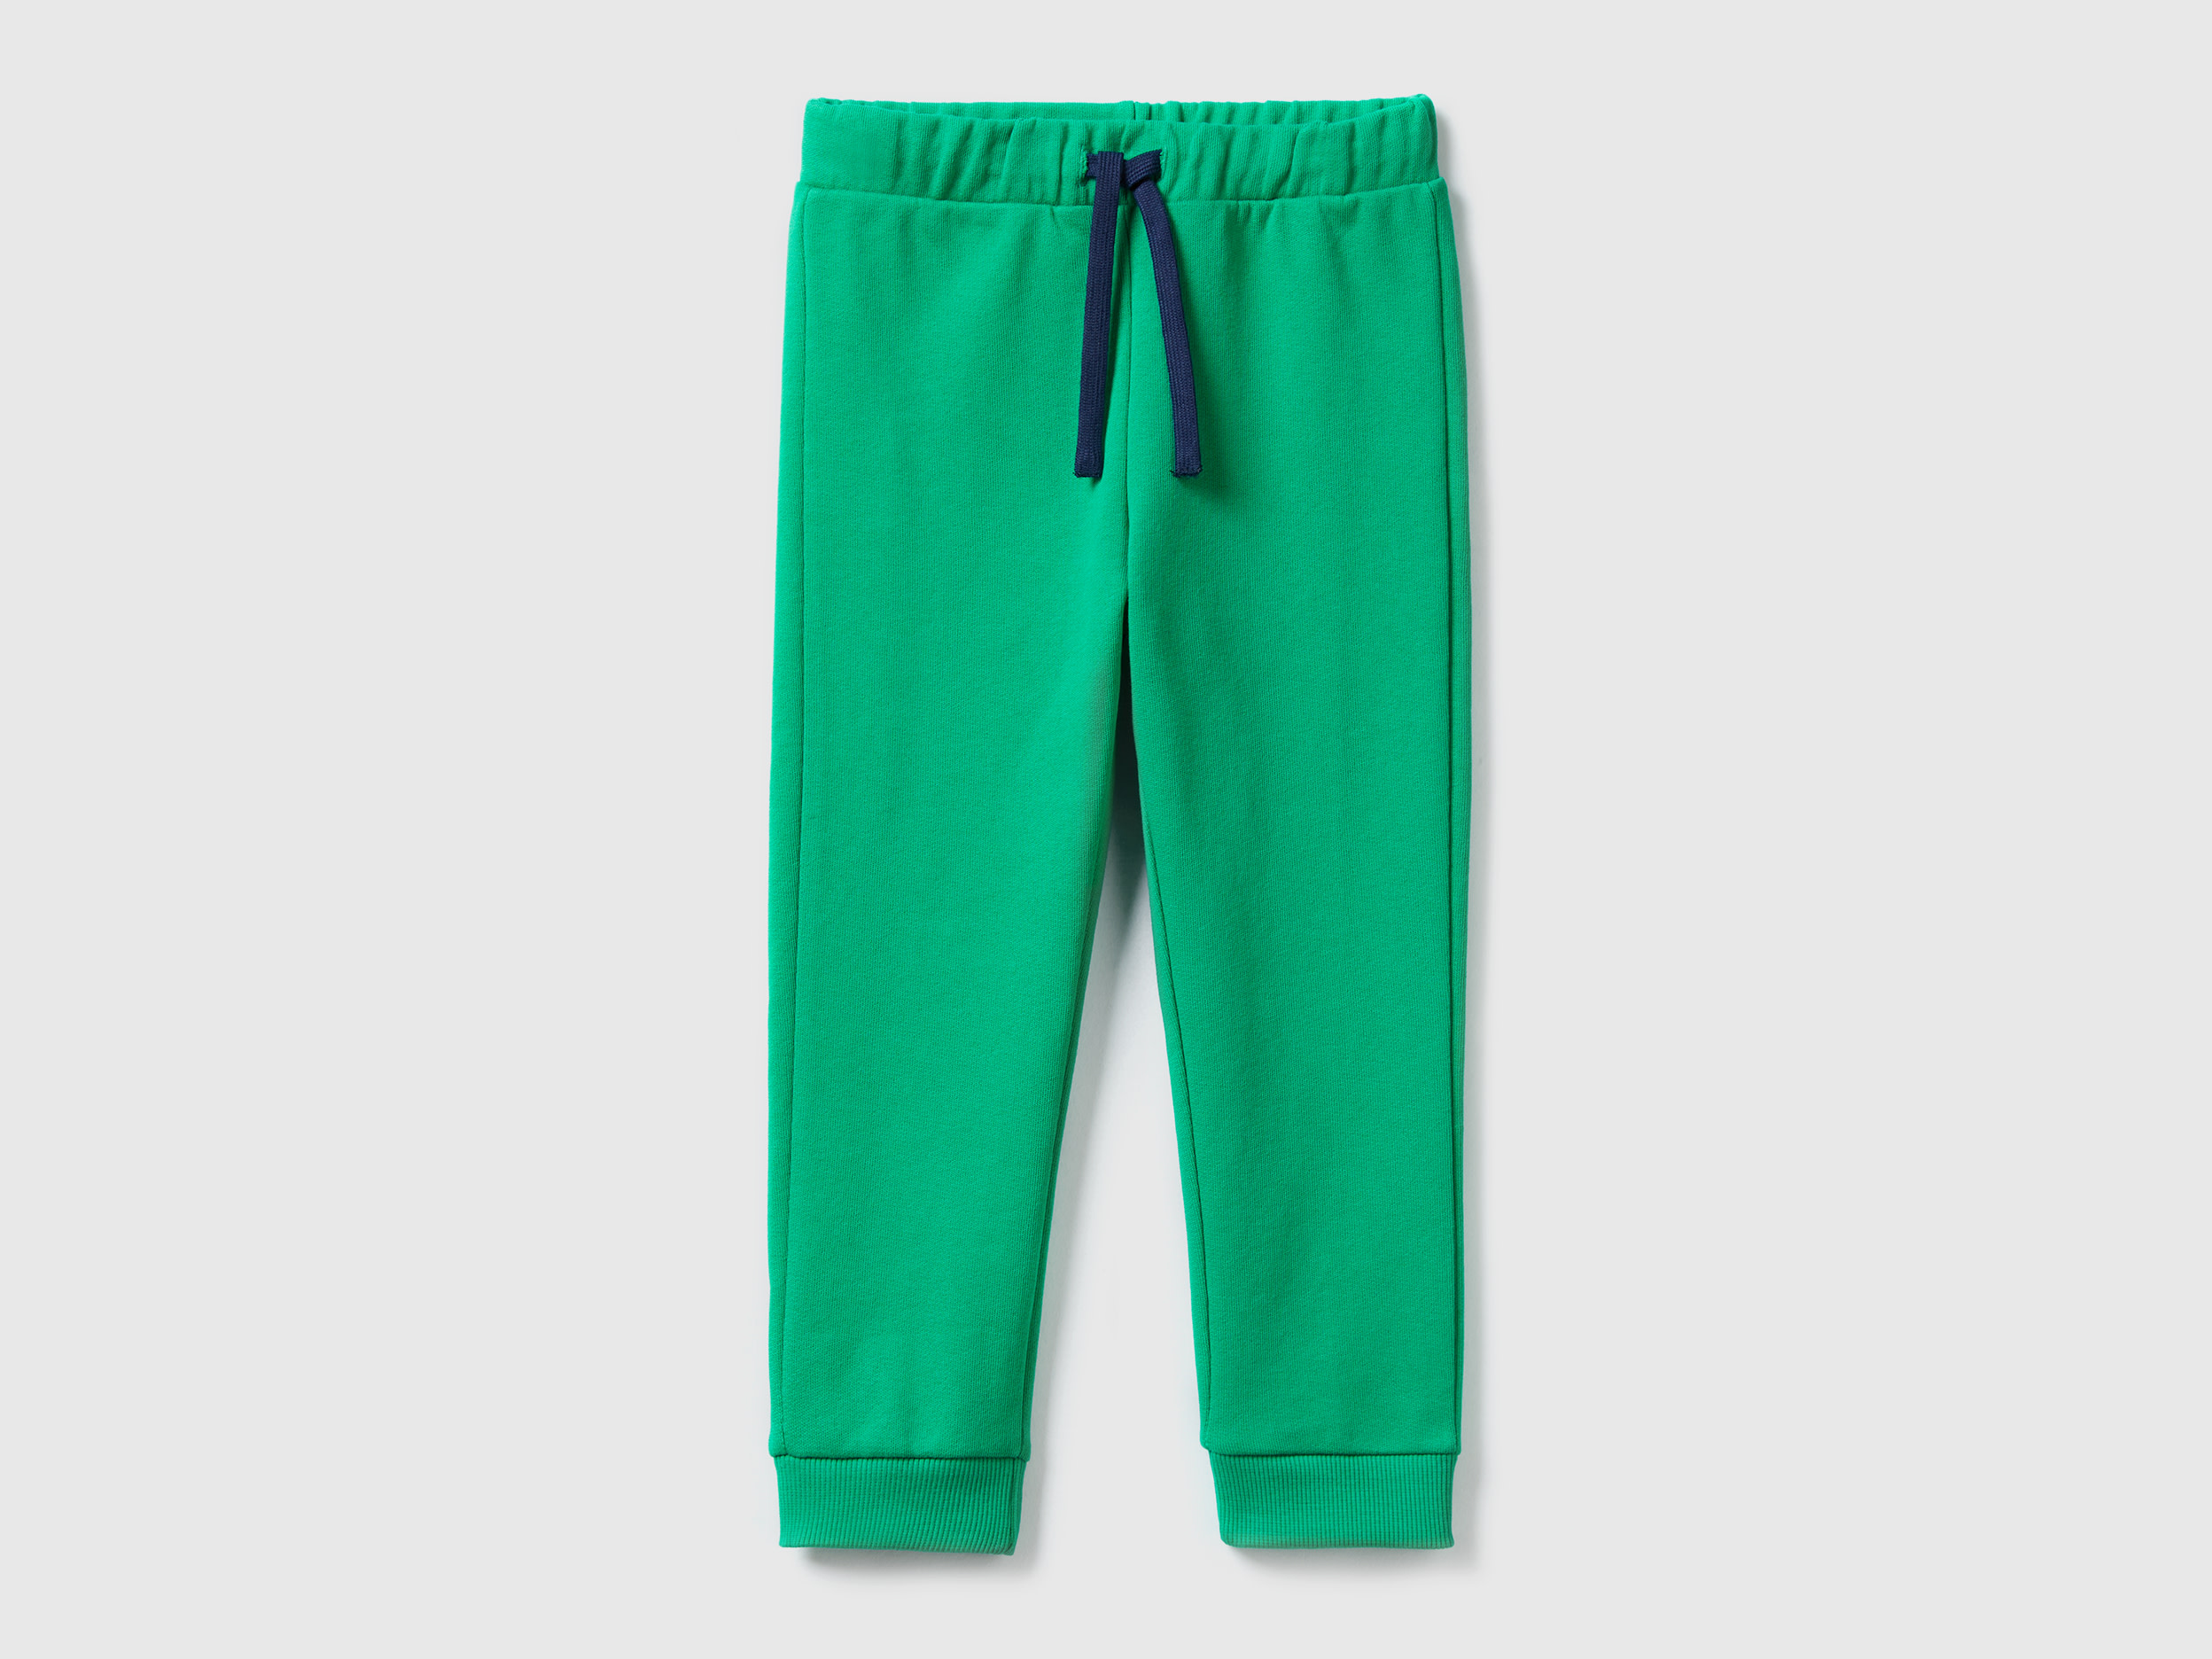 Benetton, Sweatpants With Pocket, size 18-24, Green, Kids